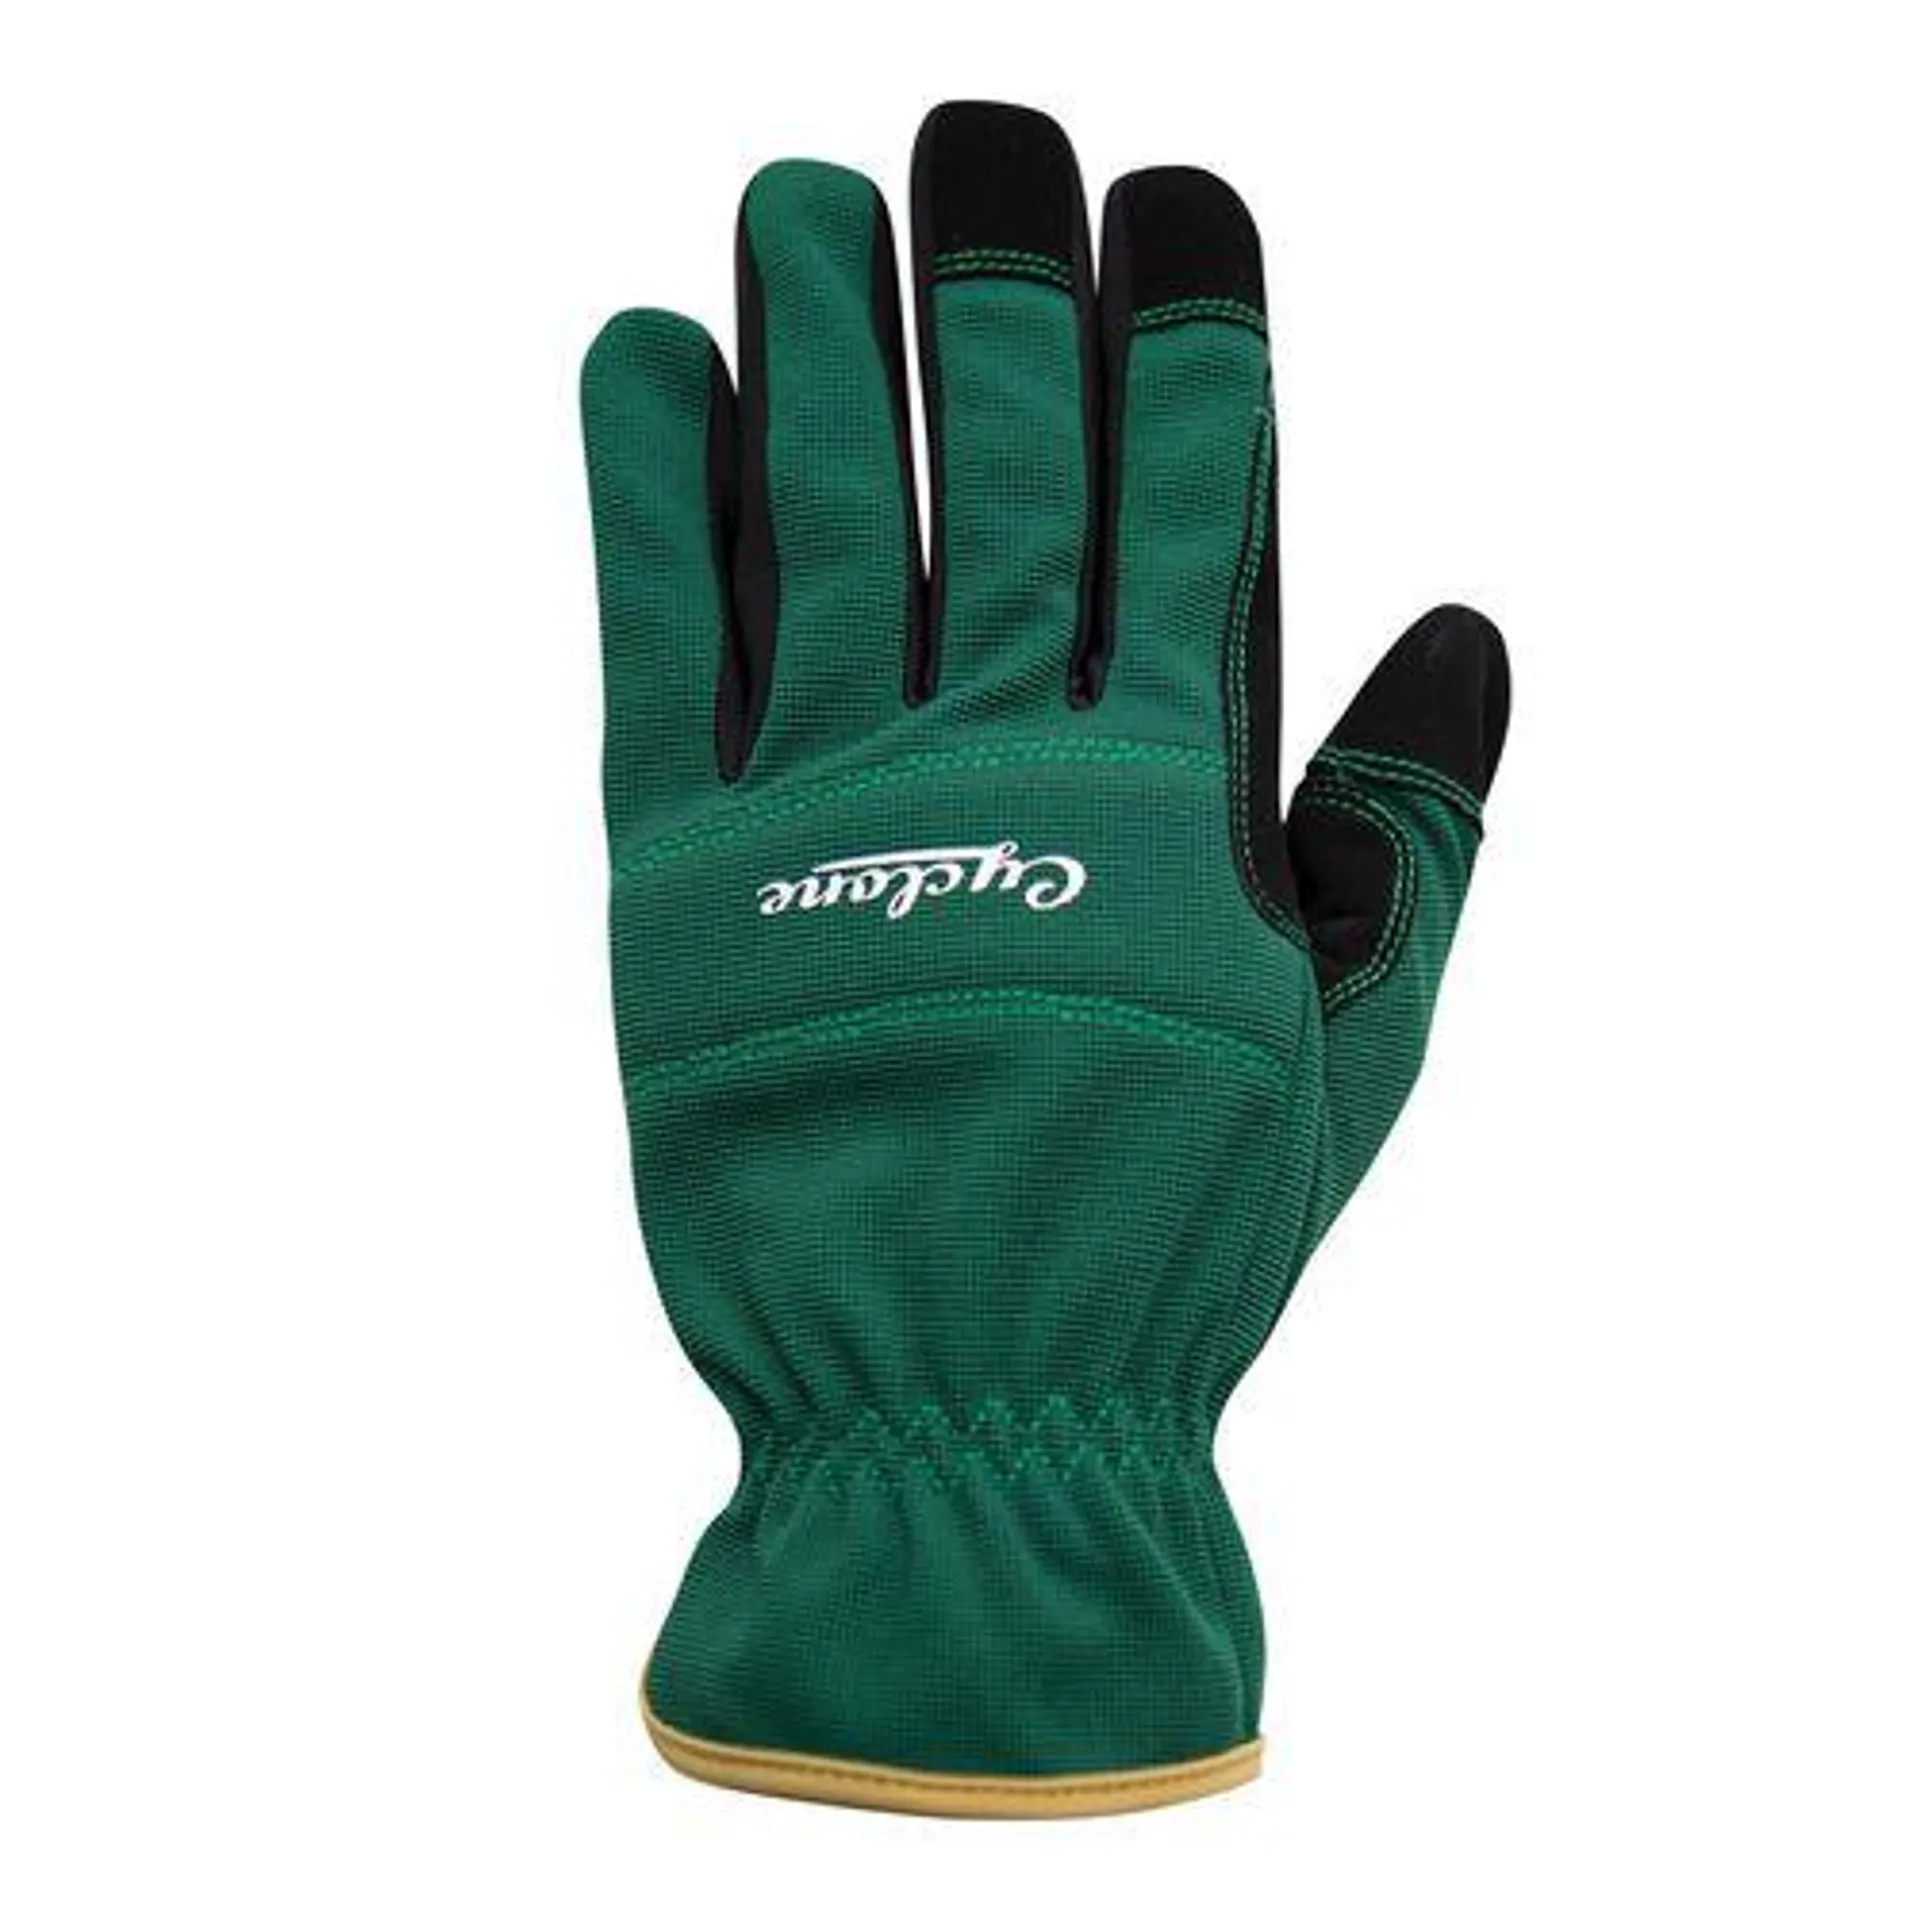 Cyclone Fully Synthetic Garden Gloves - Large